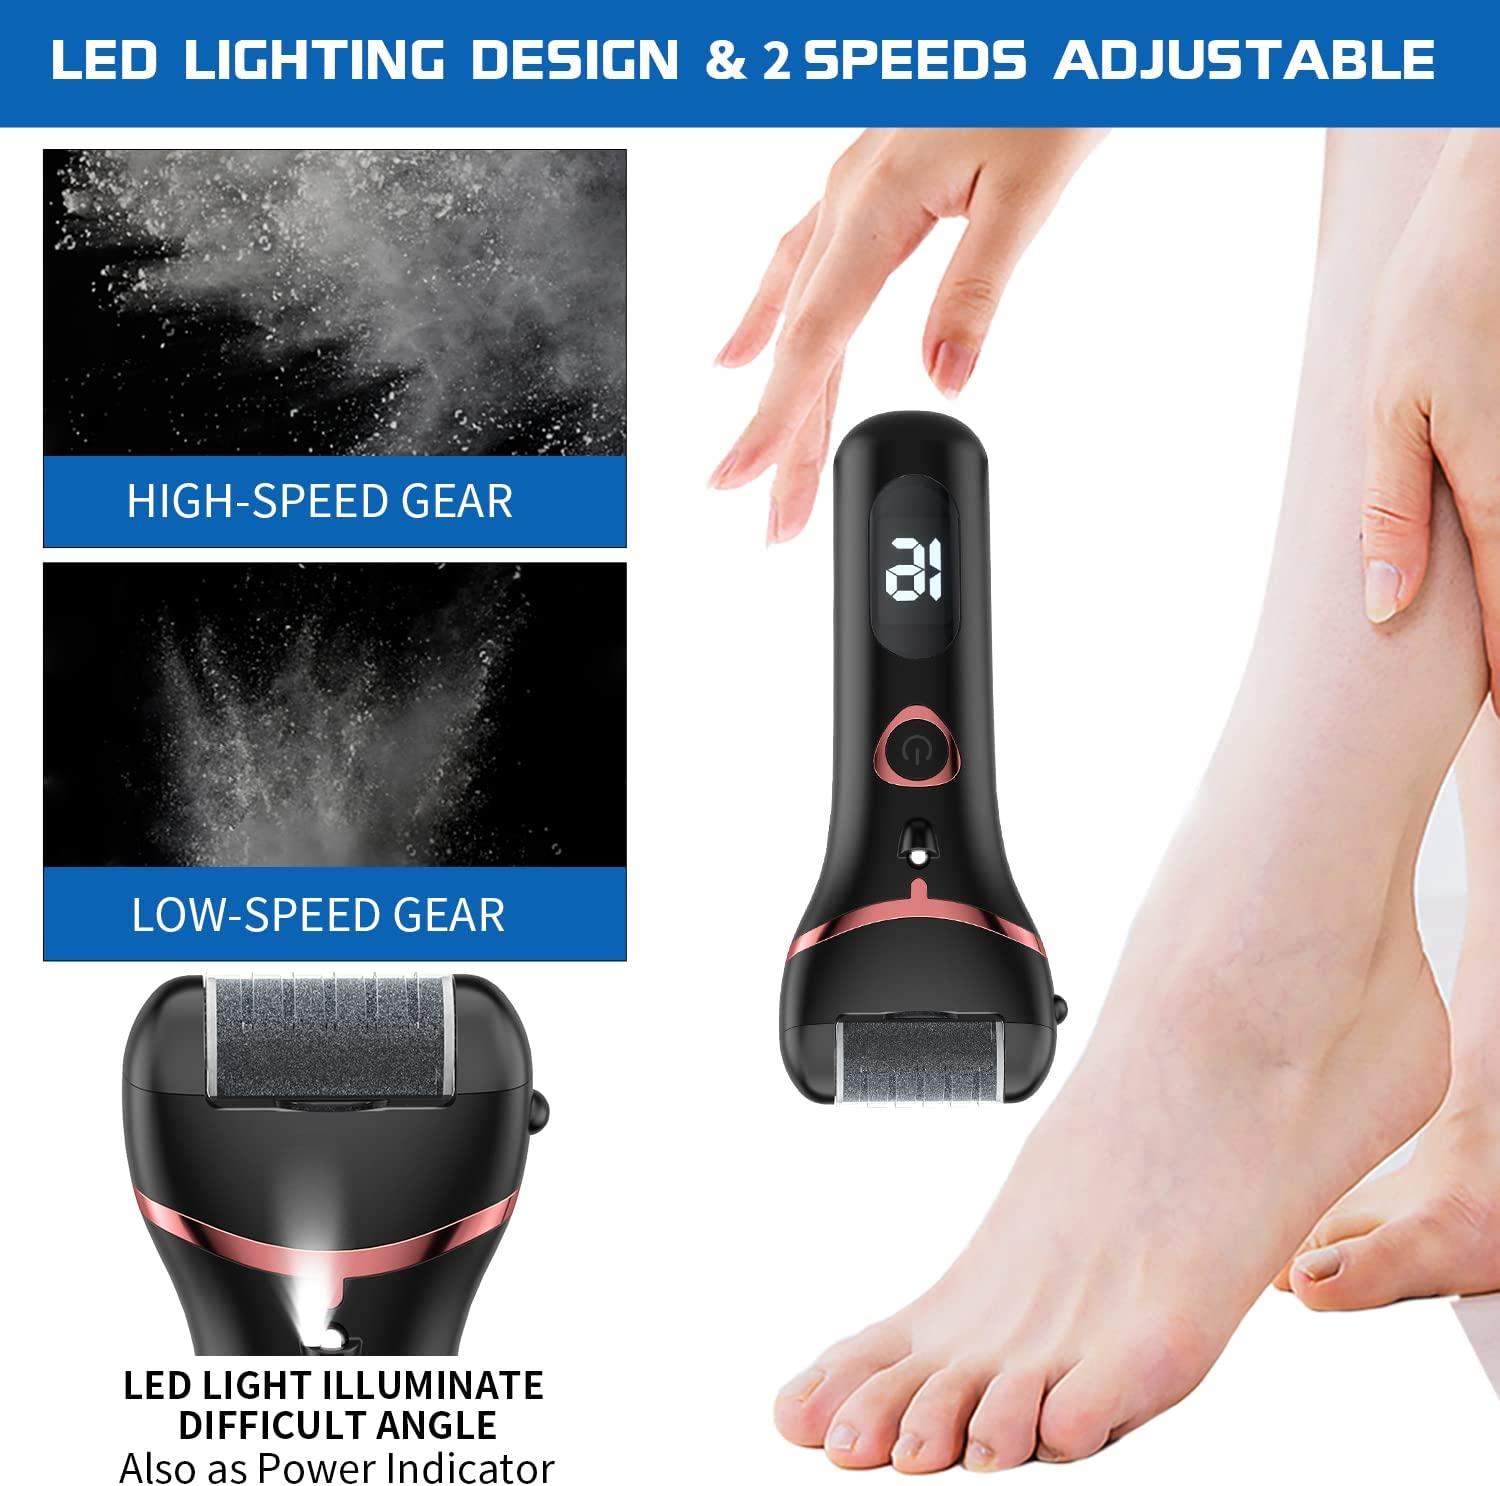 Electric Foot Dead Skin Exfoliator Callus Remover Rechargeable